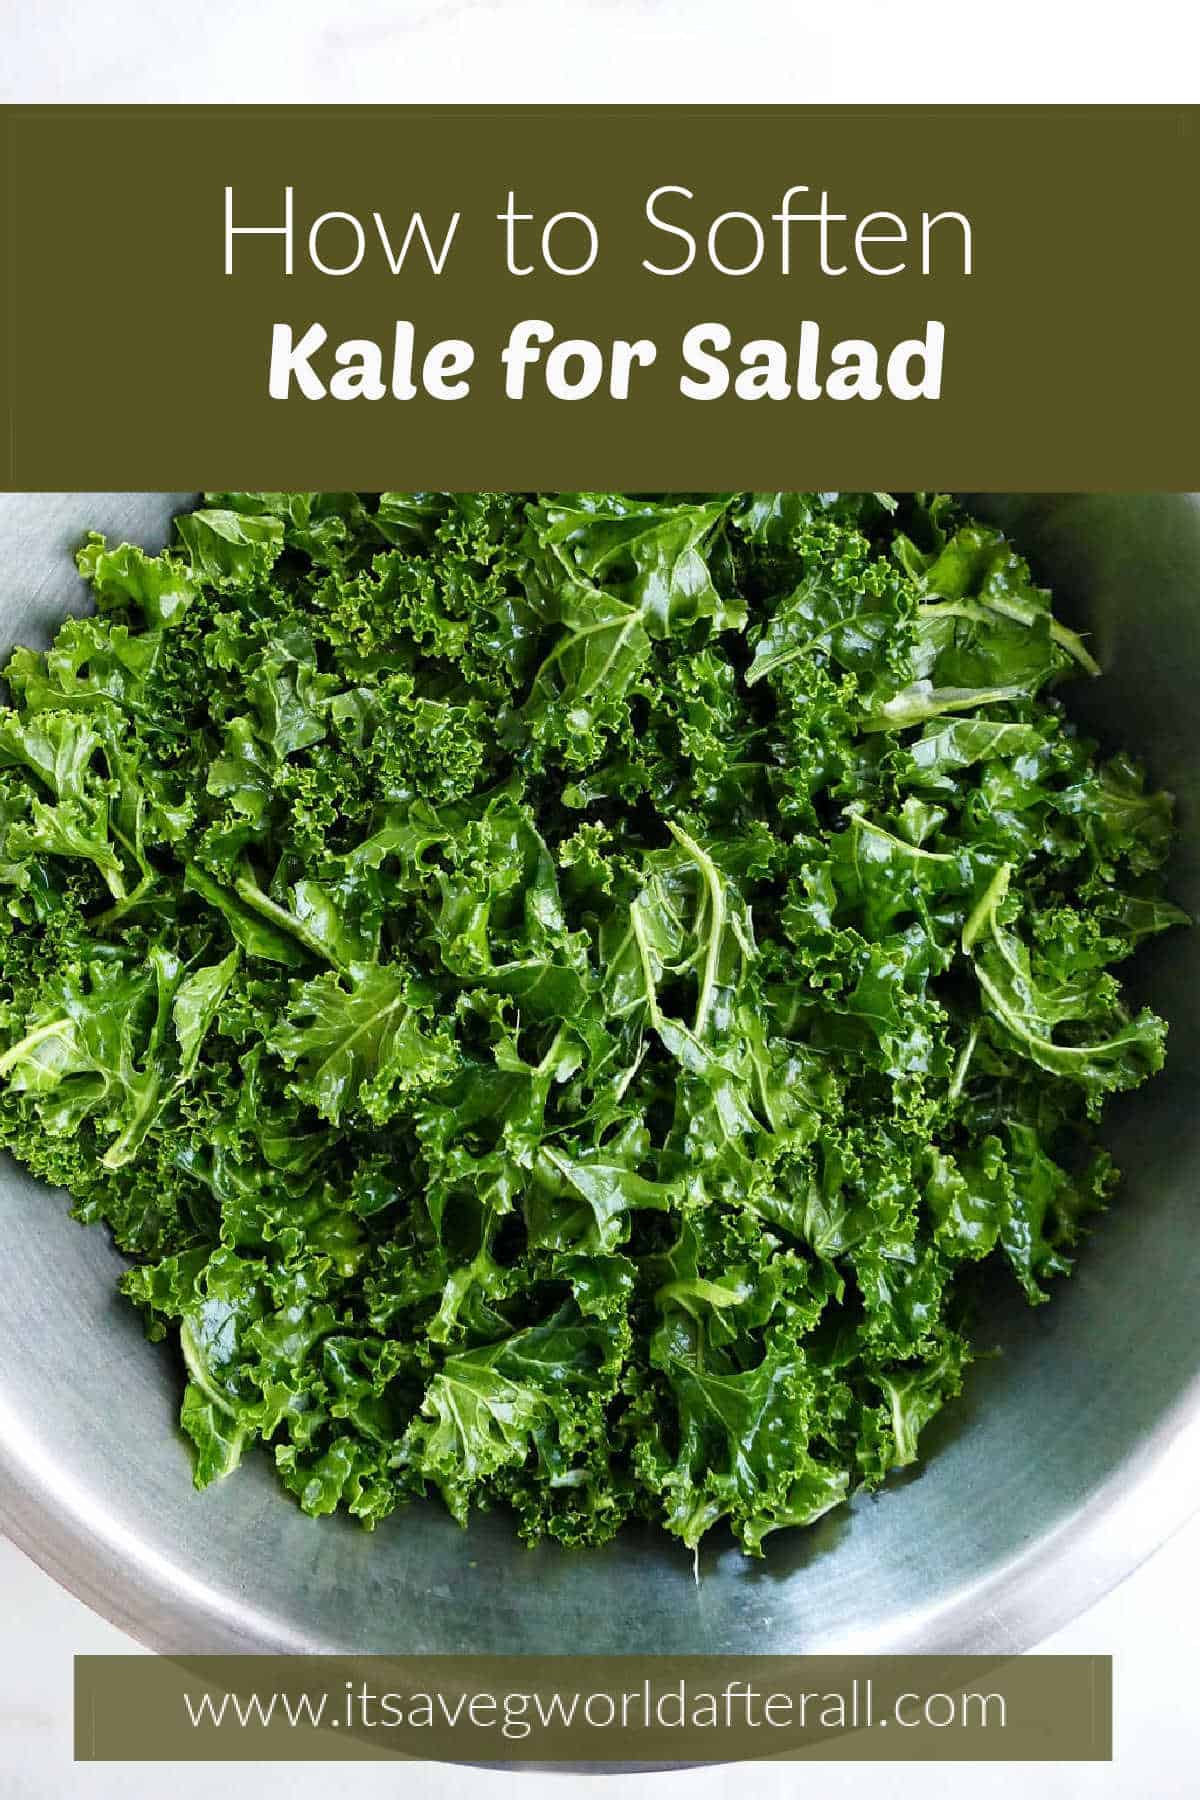 Is it Safe to Eat Raw Kale?